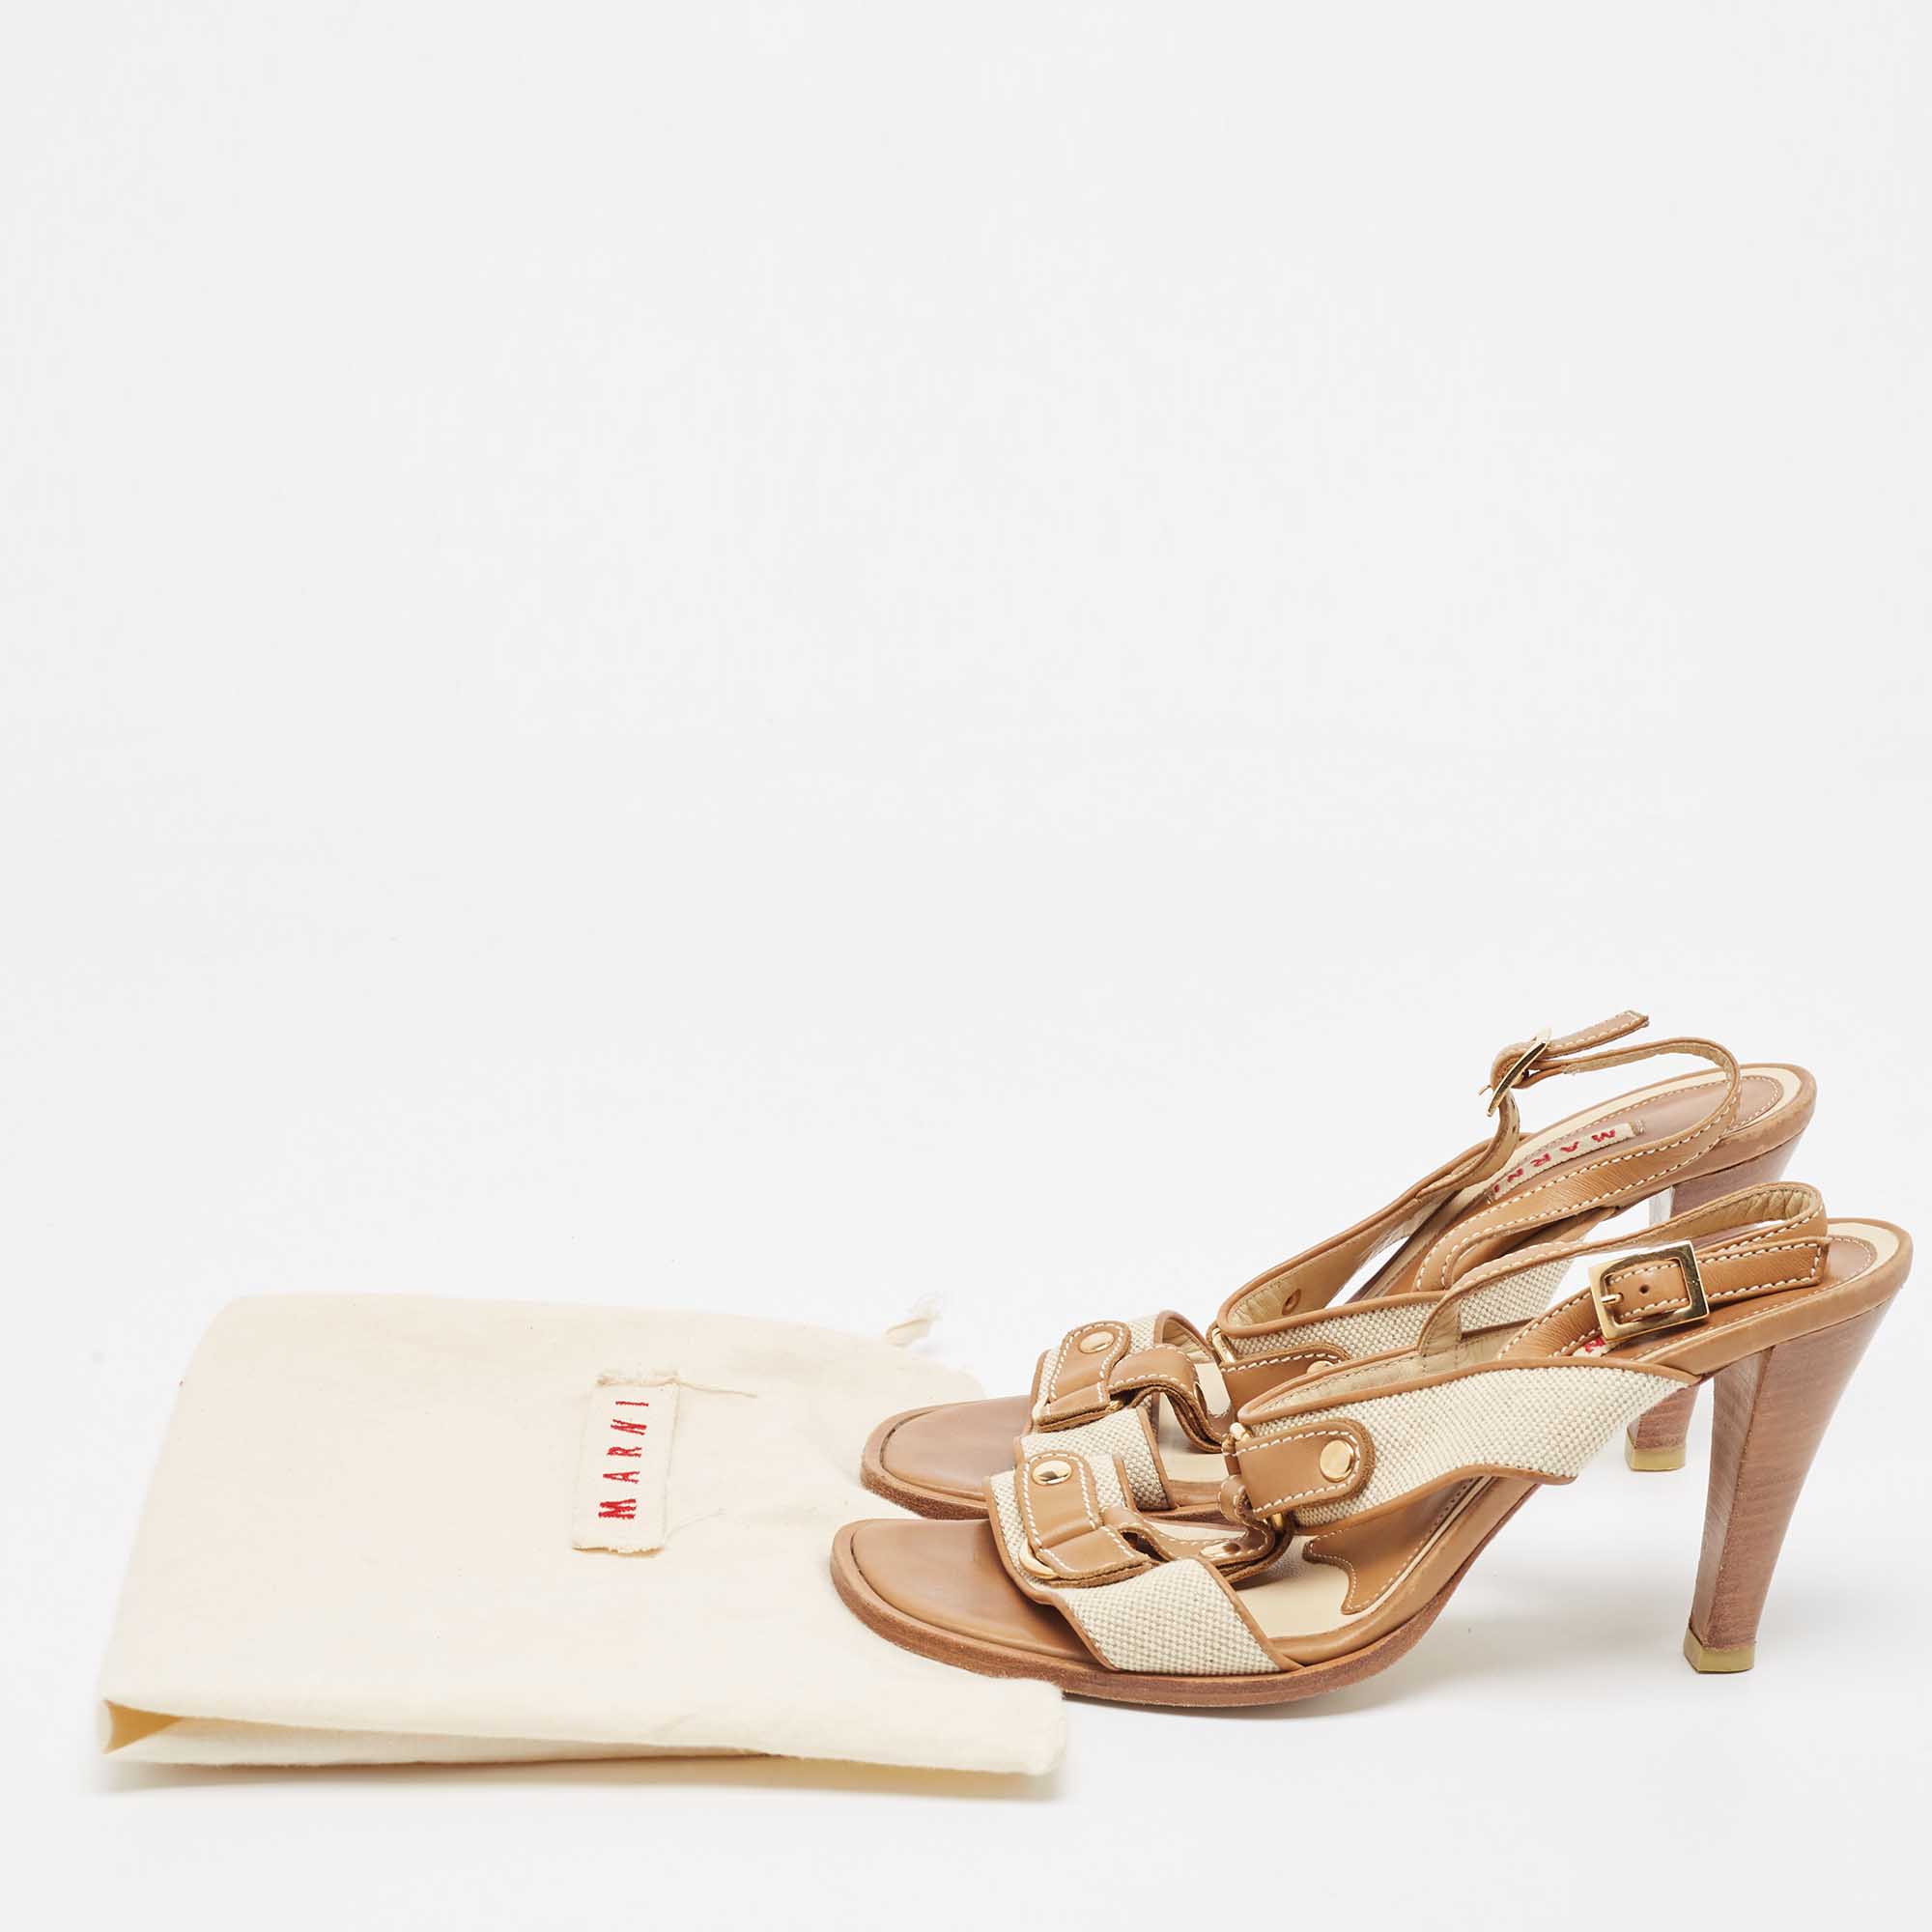 Marni Tan/Off-White Canvas And Leather T-Strap Sandals Size 39